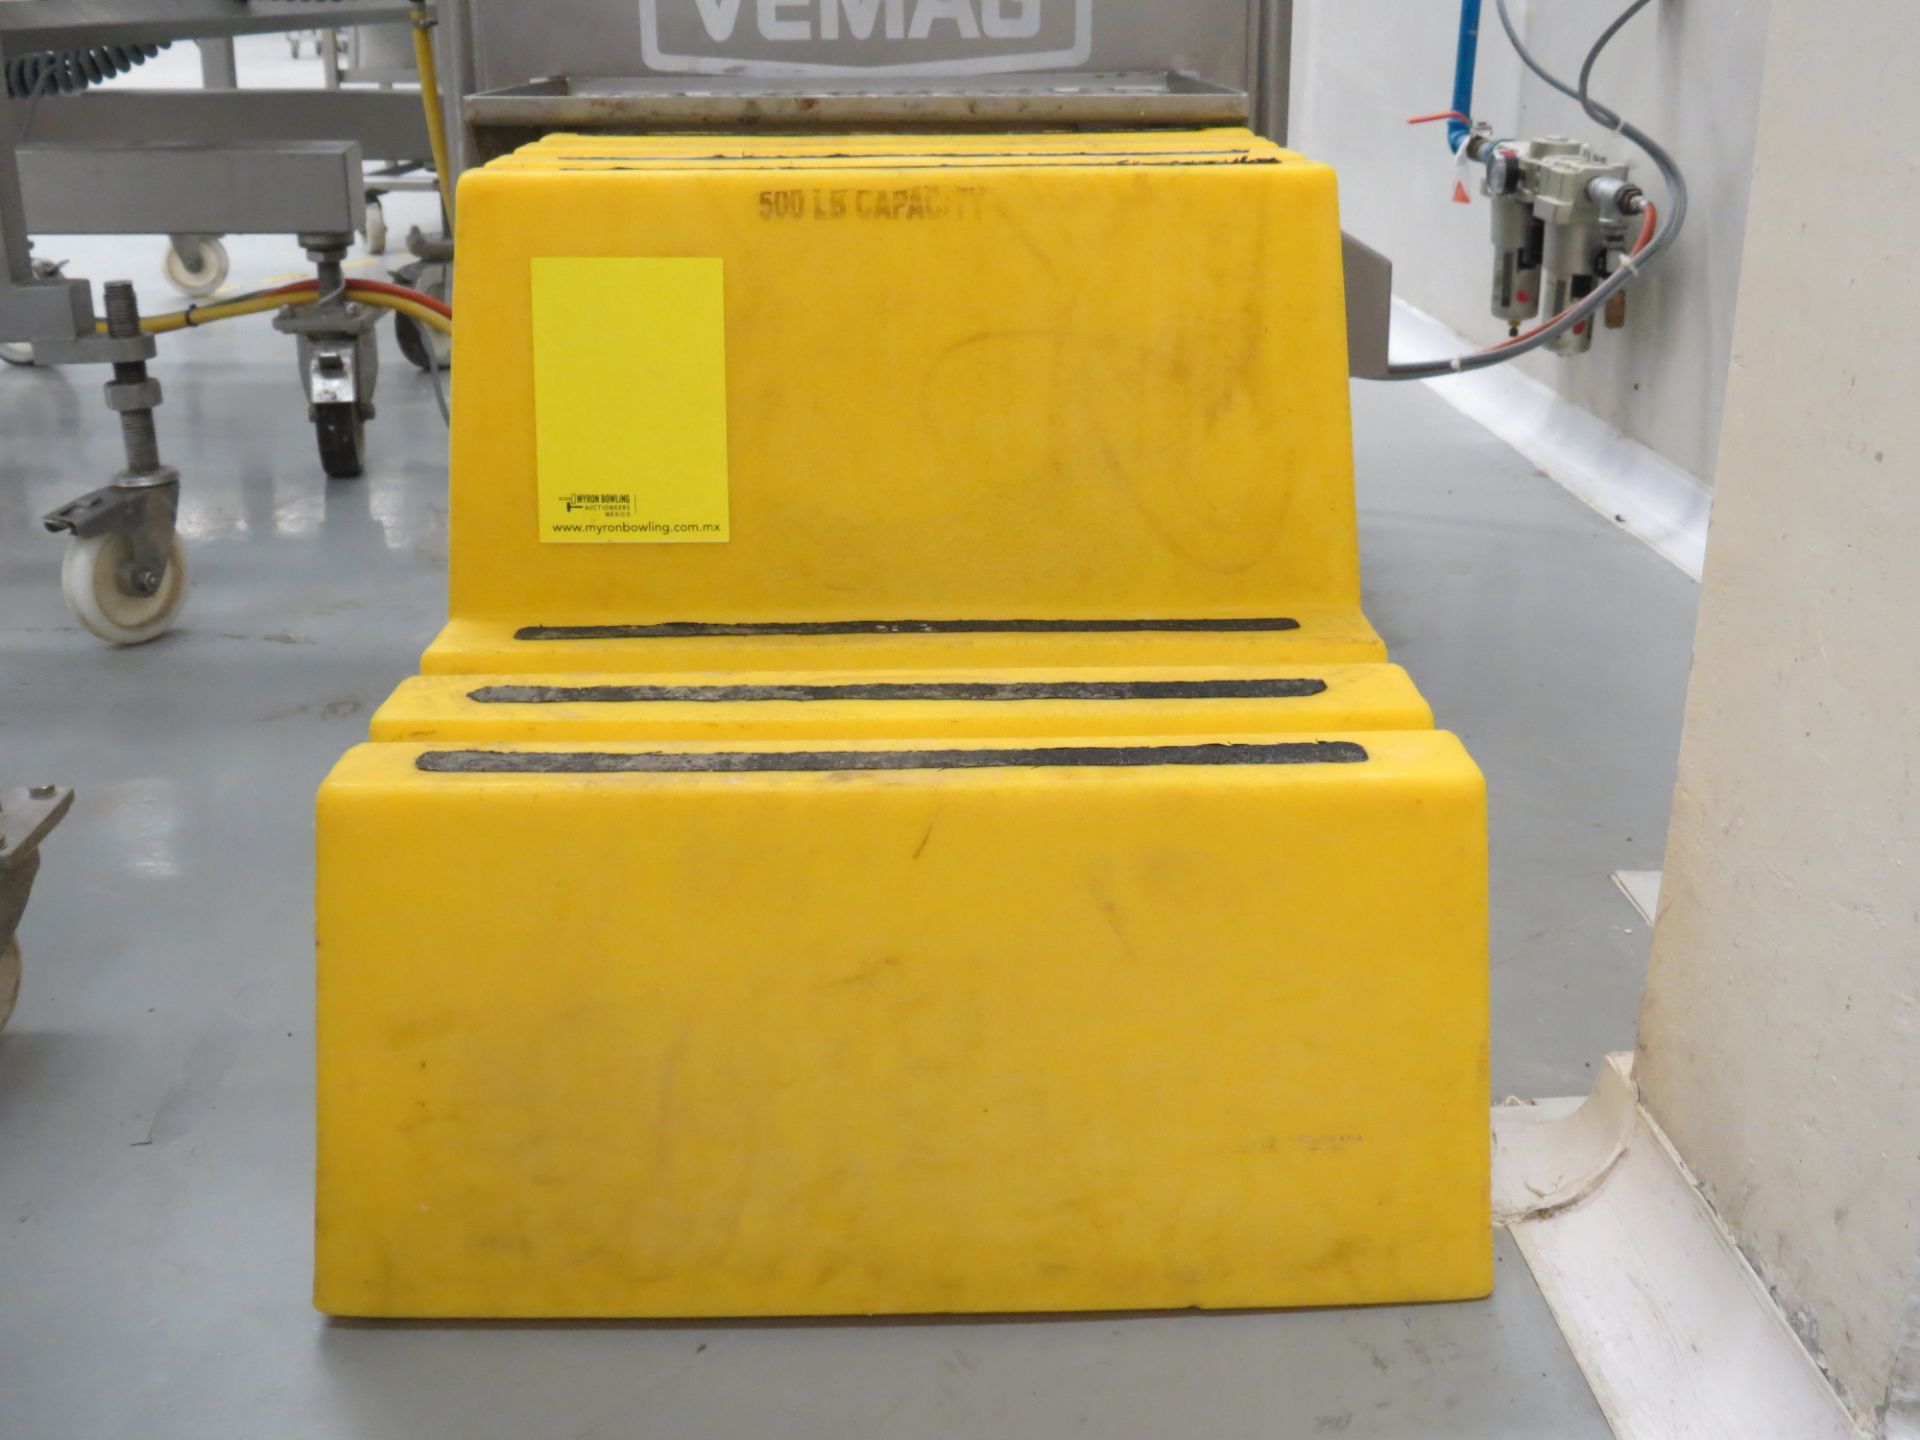 Vemag Robot 500 Pneumatic Dispenser SN 1284993, with PLC Model PC878 - Image 16 of 37